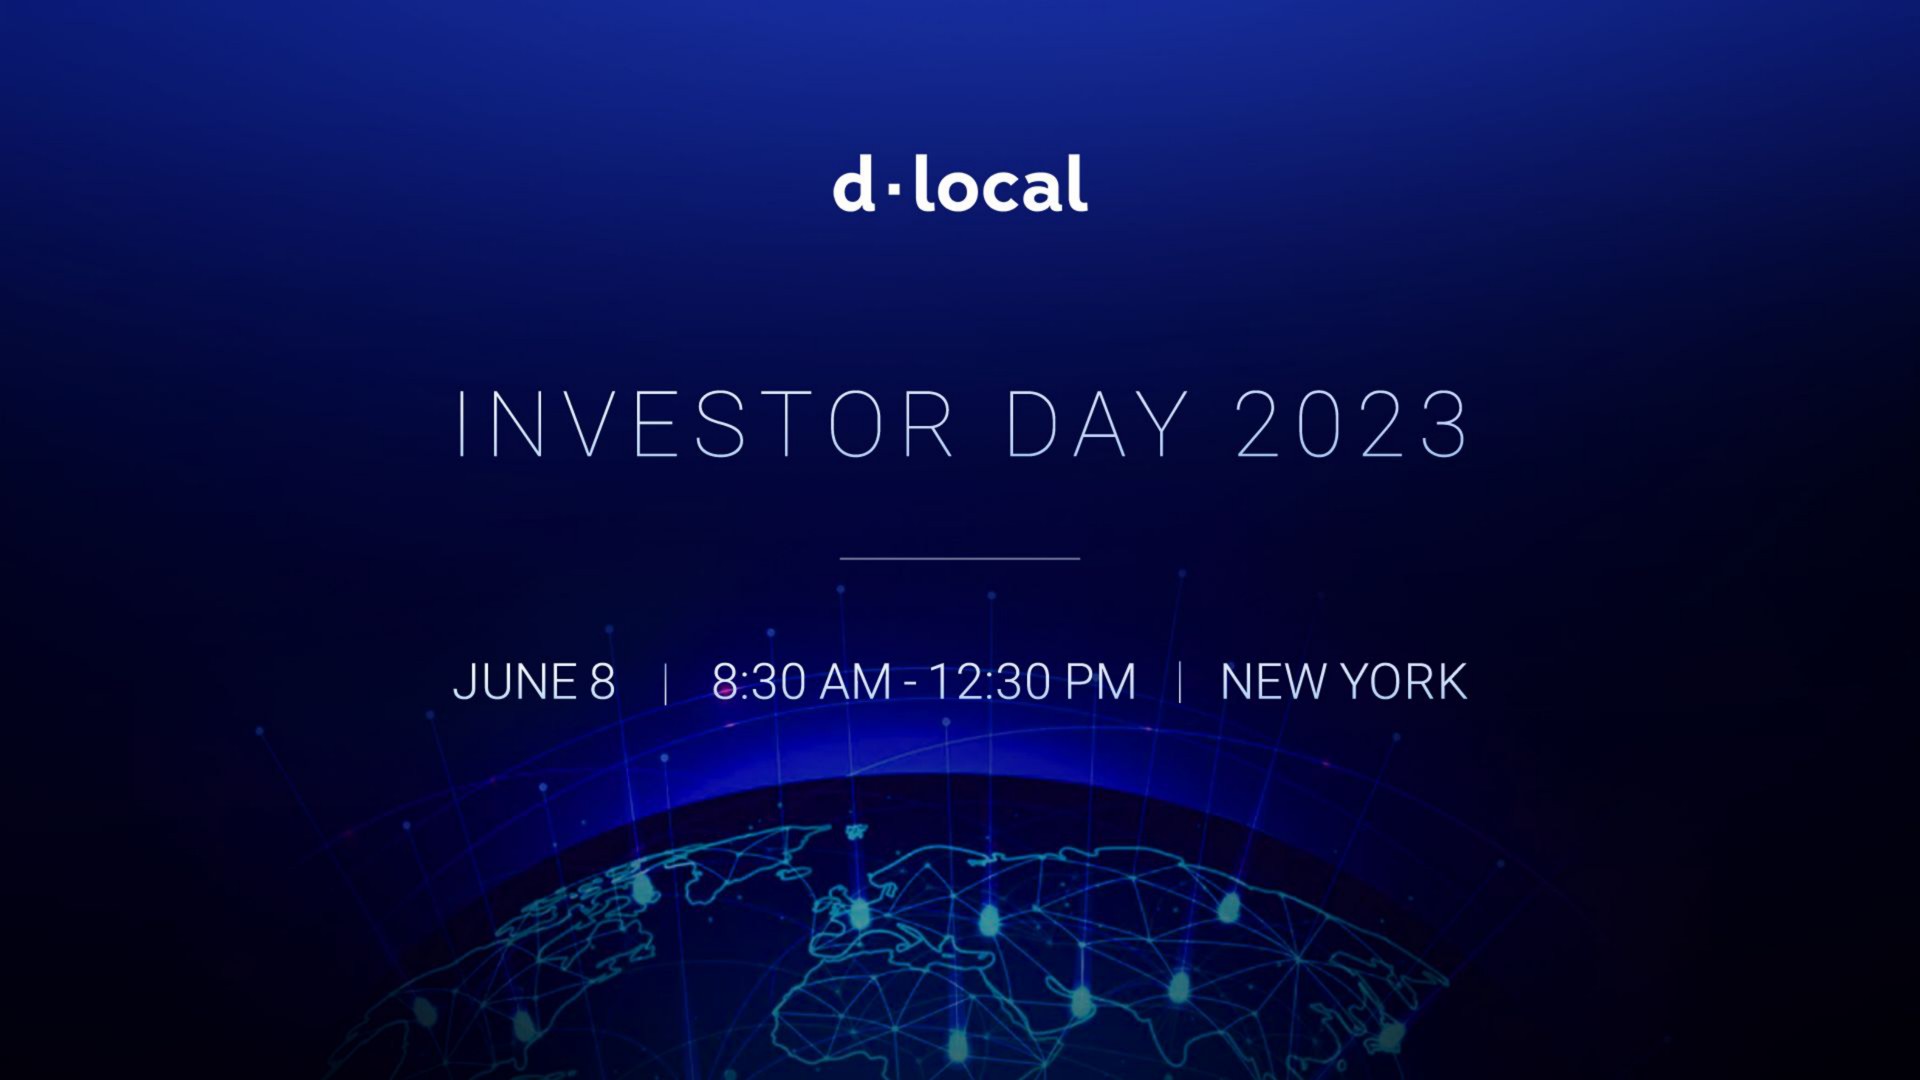 local investor day june am new york | dLocal